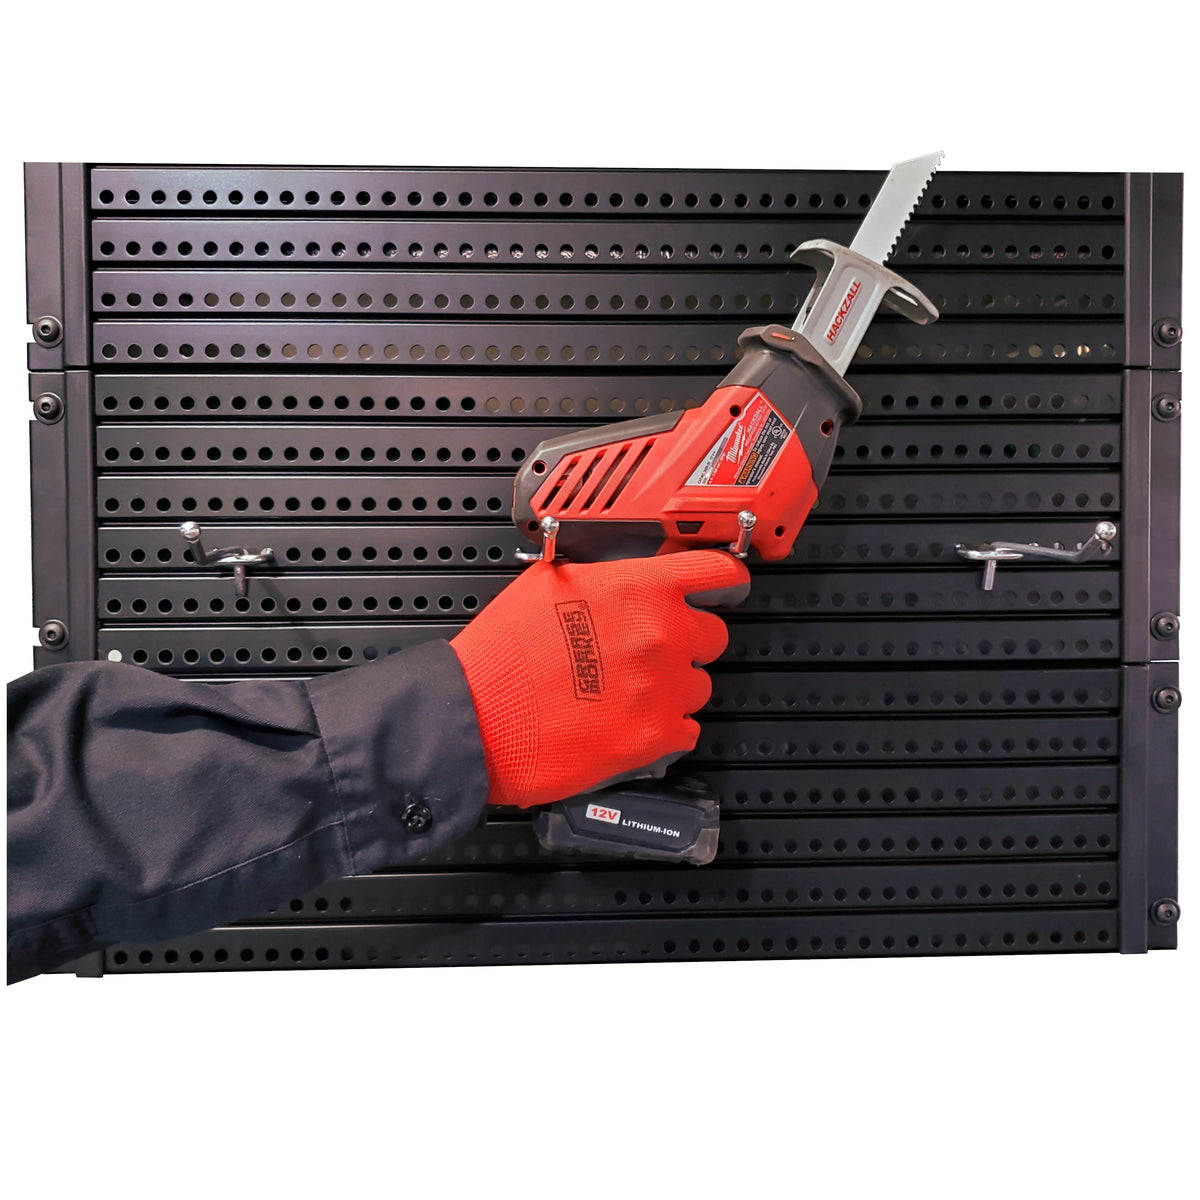 Close up image of a worker hanging a tool on a black Handypeg pegboard product.